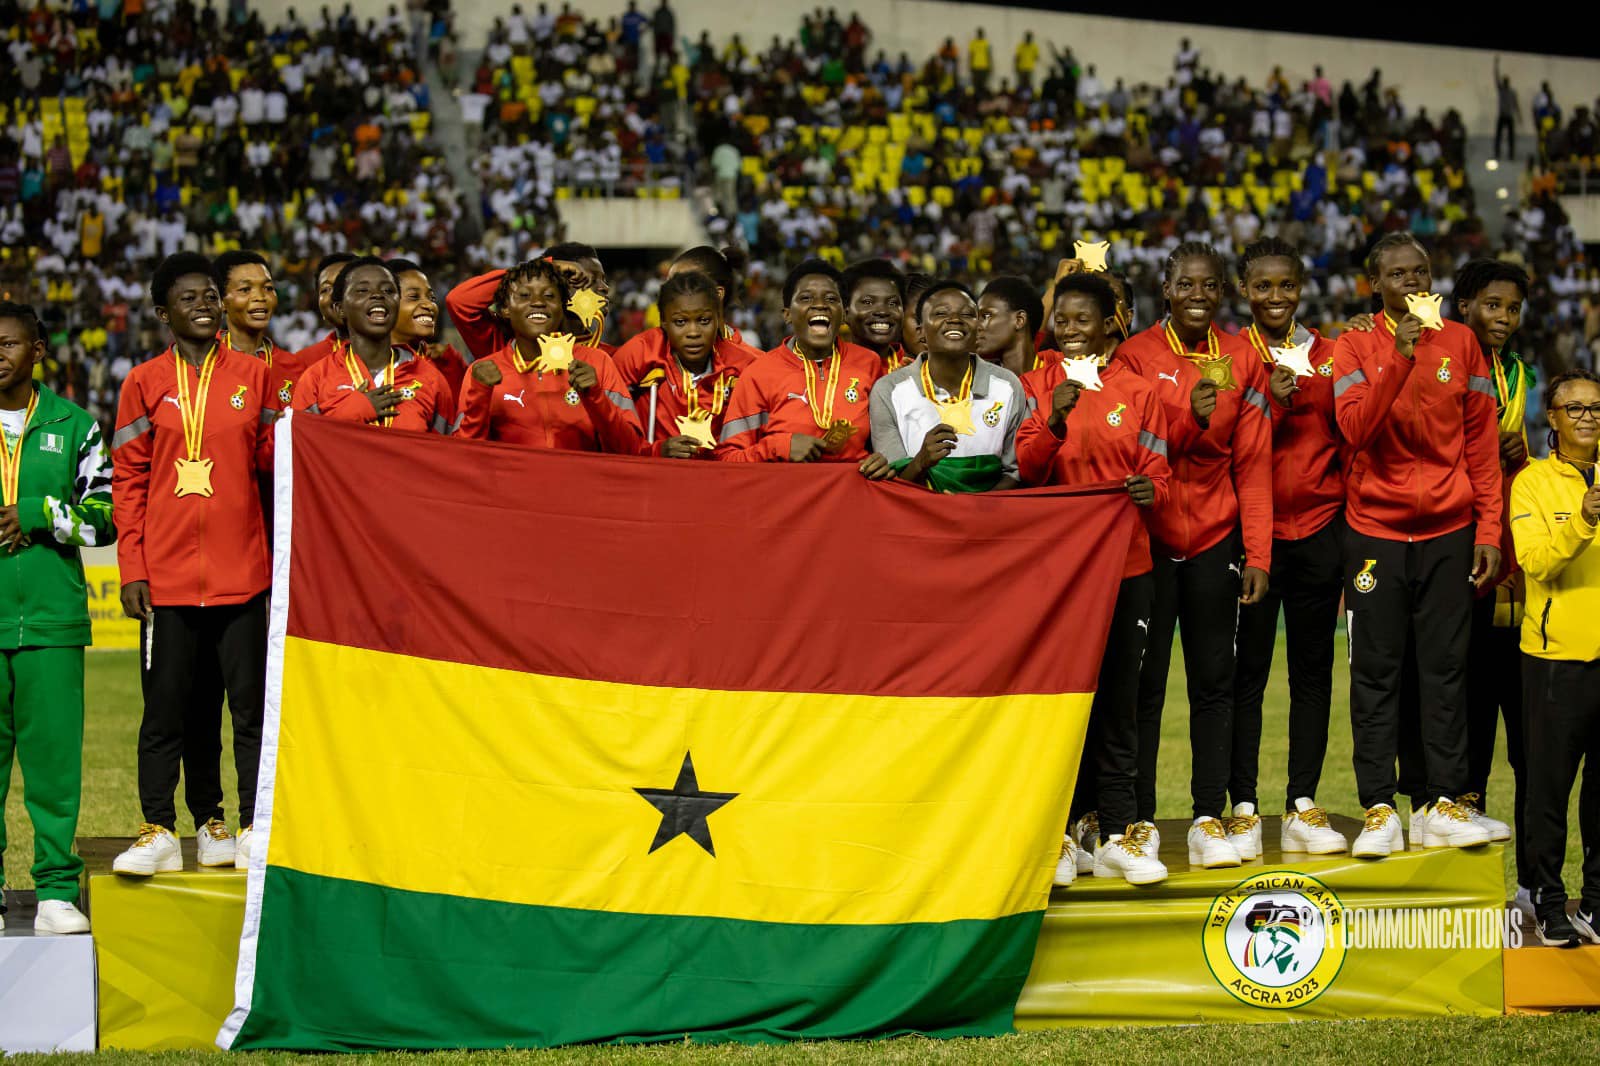 Victory Reigns: Ghana's Black Princesses Crowned Champions of the Women's Football Tournament at the 13th African Games!